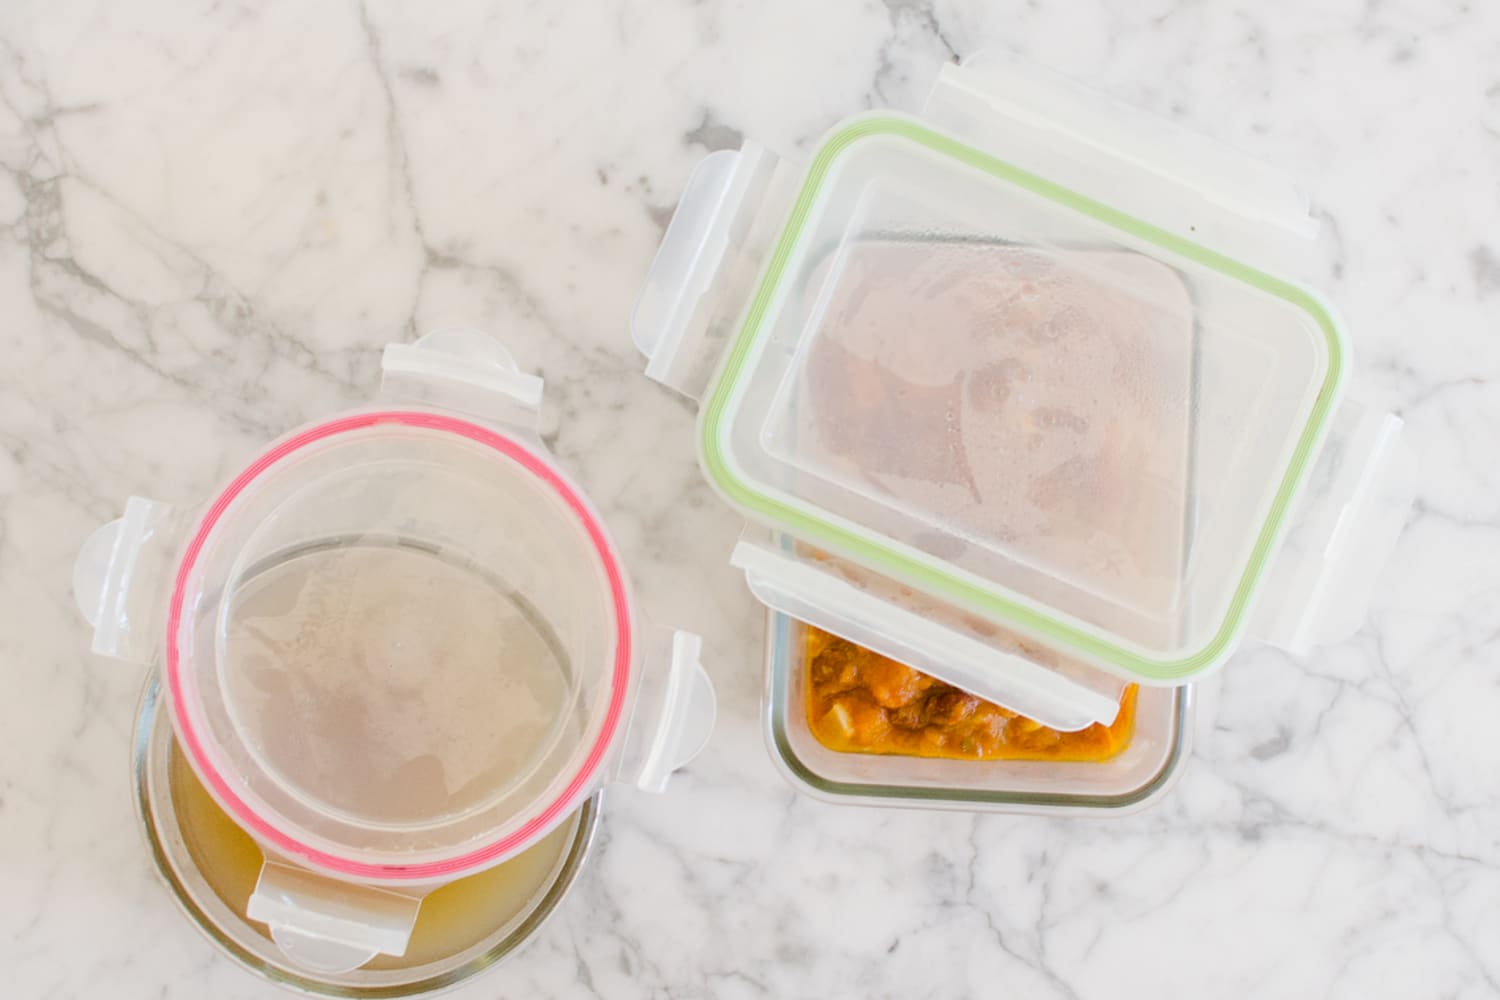 The Best Food Storage Containers (2021): The Best Plastic and Glass  Containers for Storing Leftovers, Reheating Food, and More